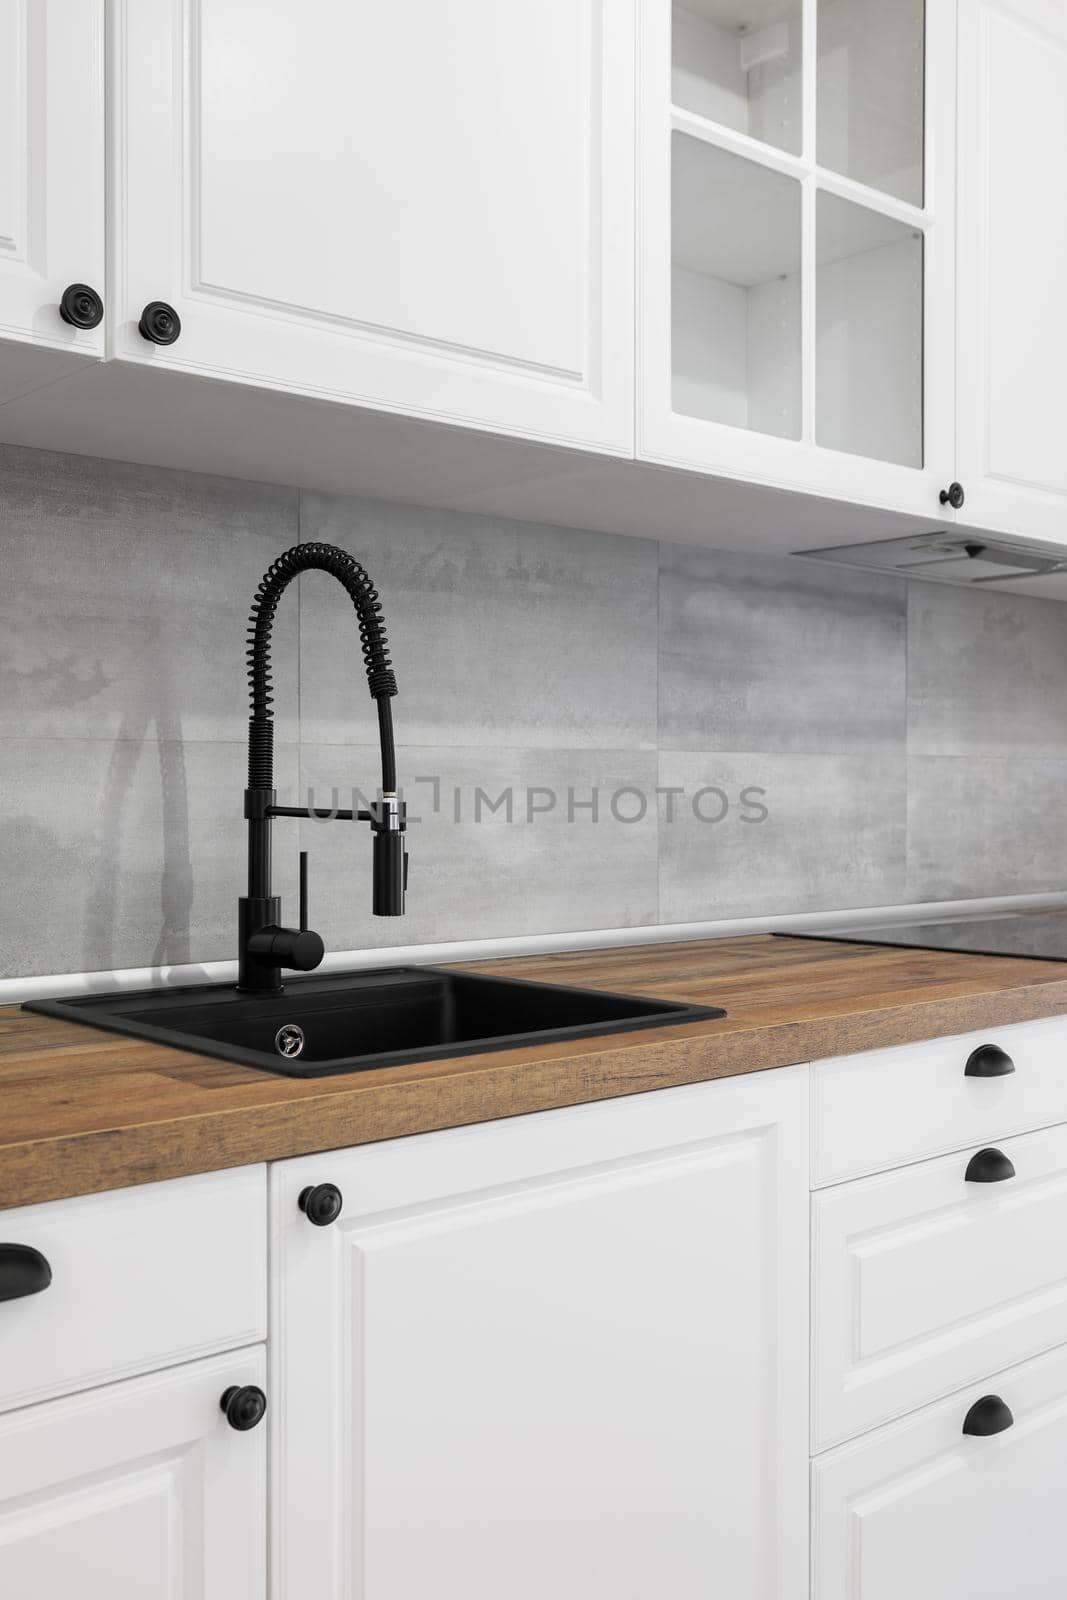 Simple and elegant kitchen with wooden countertop, white cupboards, drawers and black sink. by apavlin